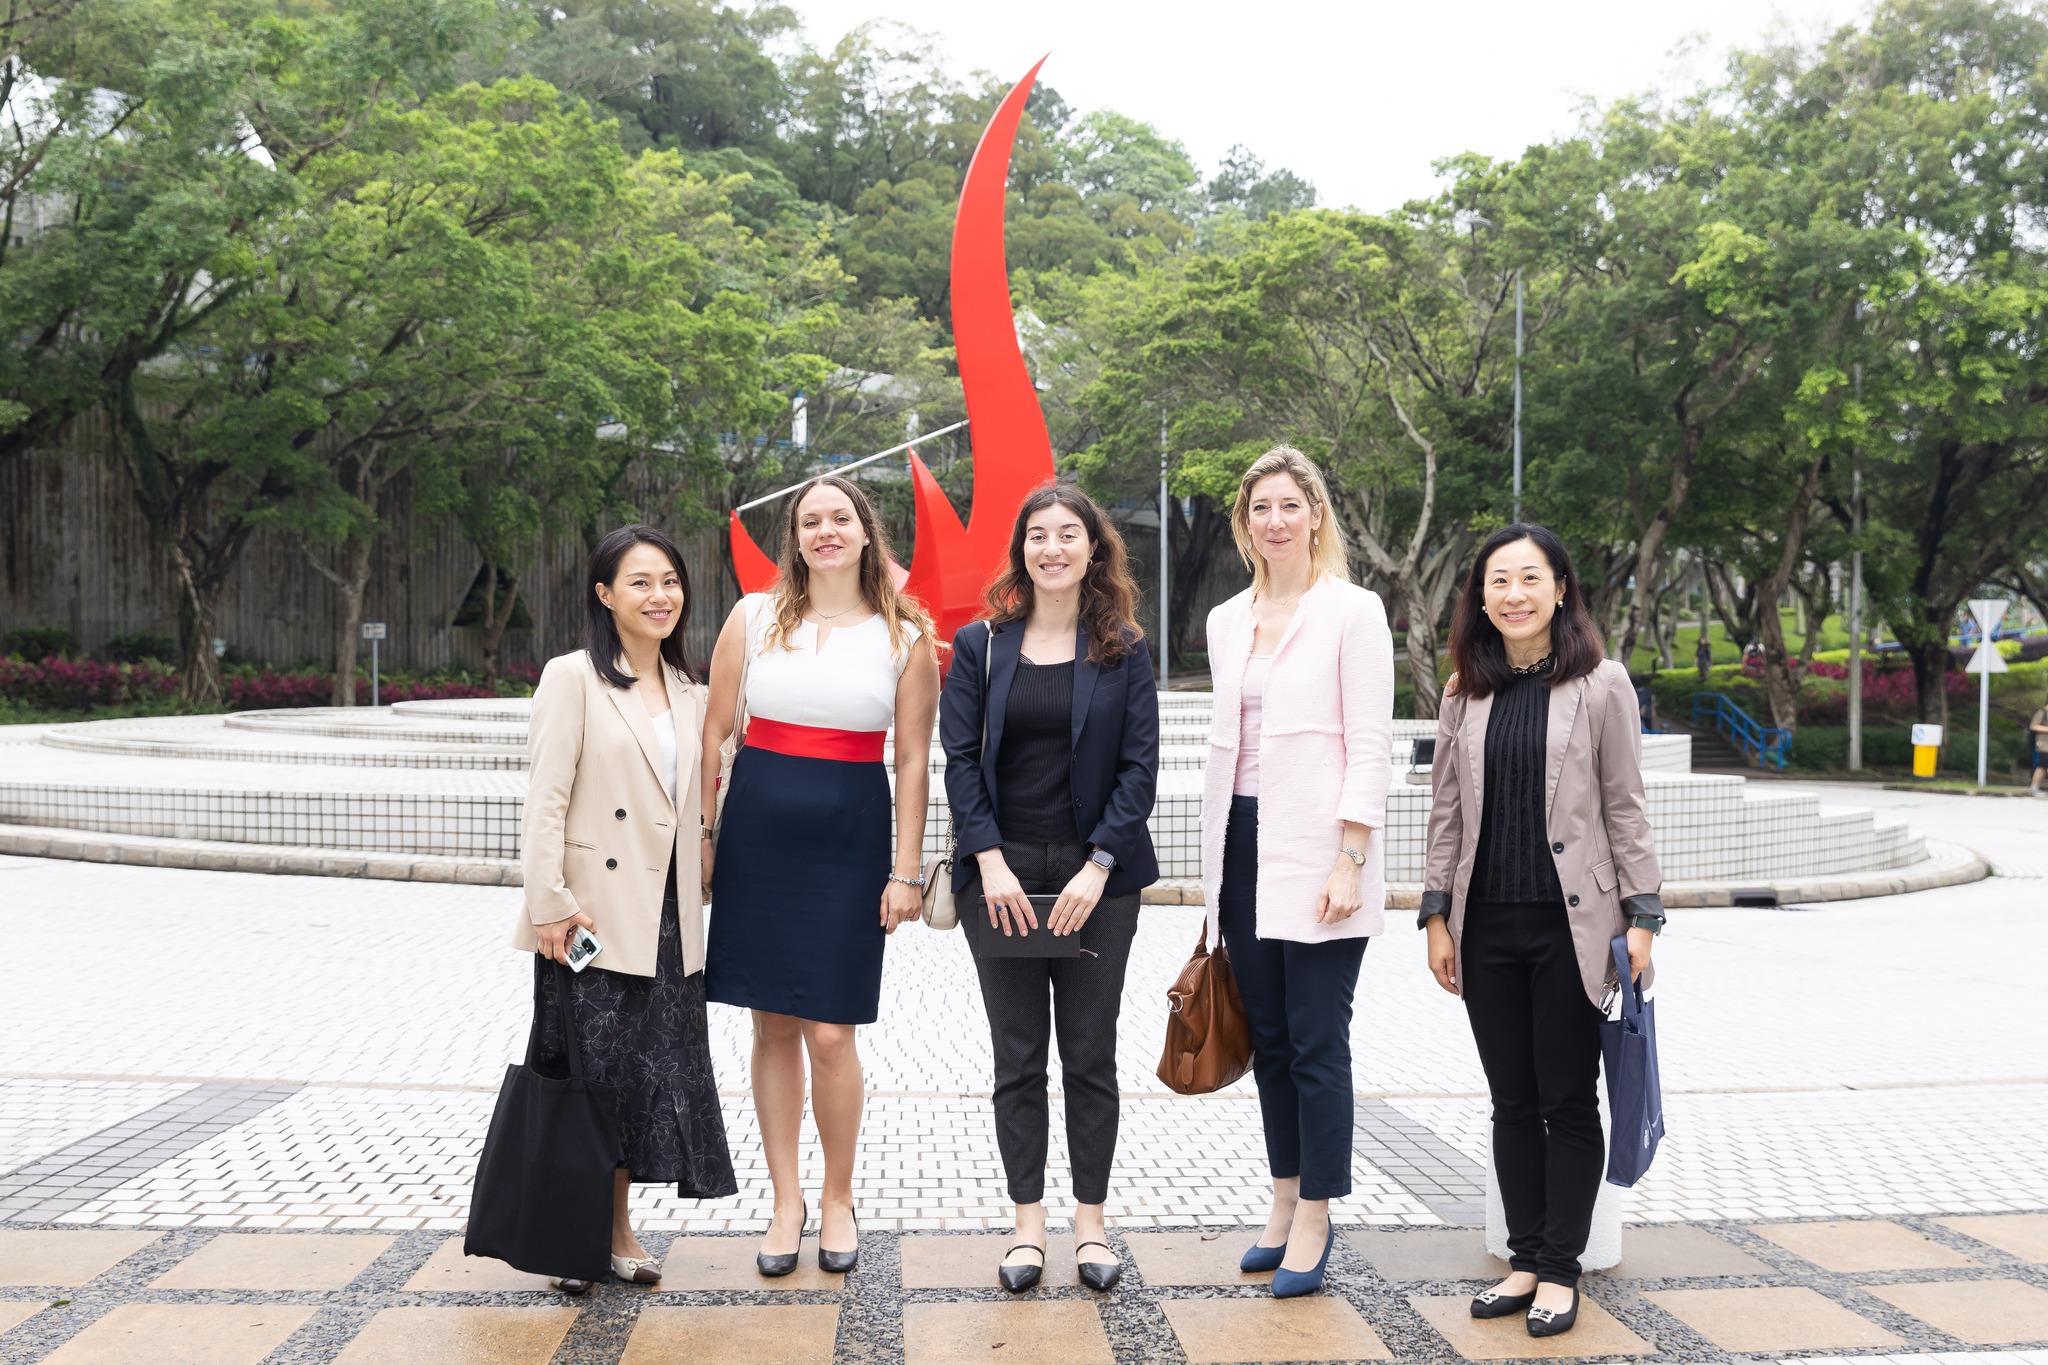 CG Drulhe and her delegation takes a photo in front of the iconic “Red Bird” sculpture at the Piazza.